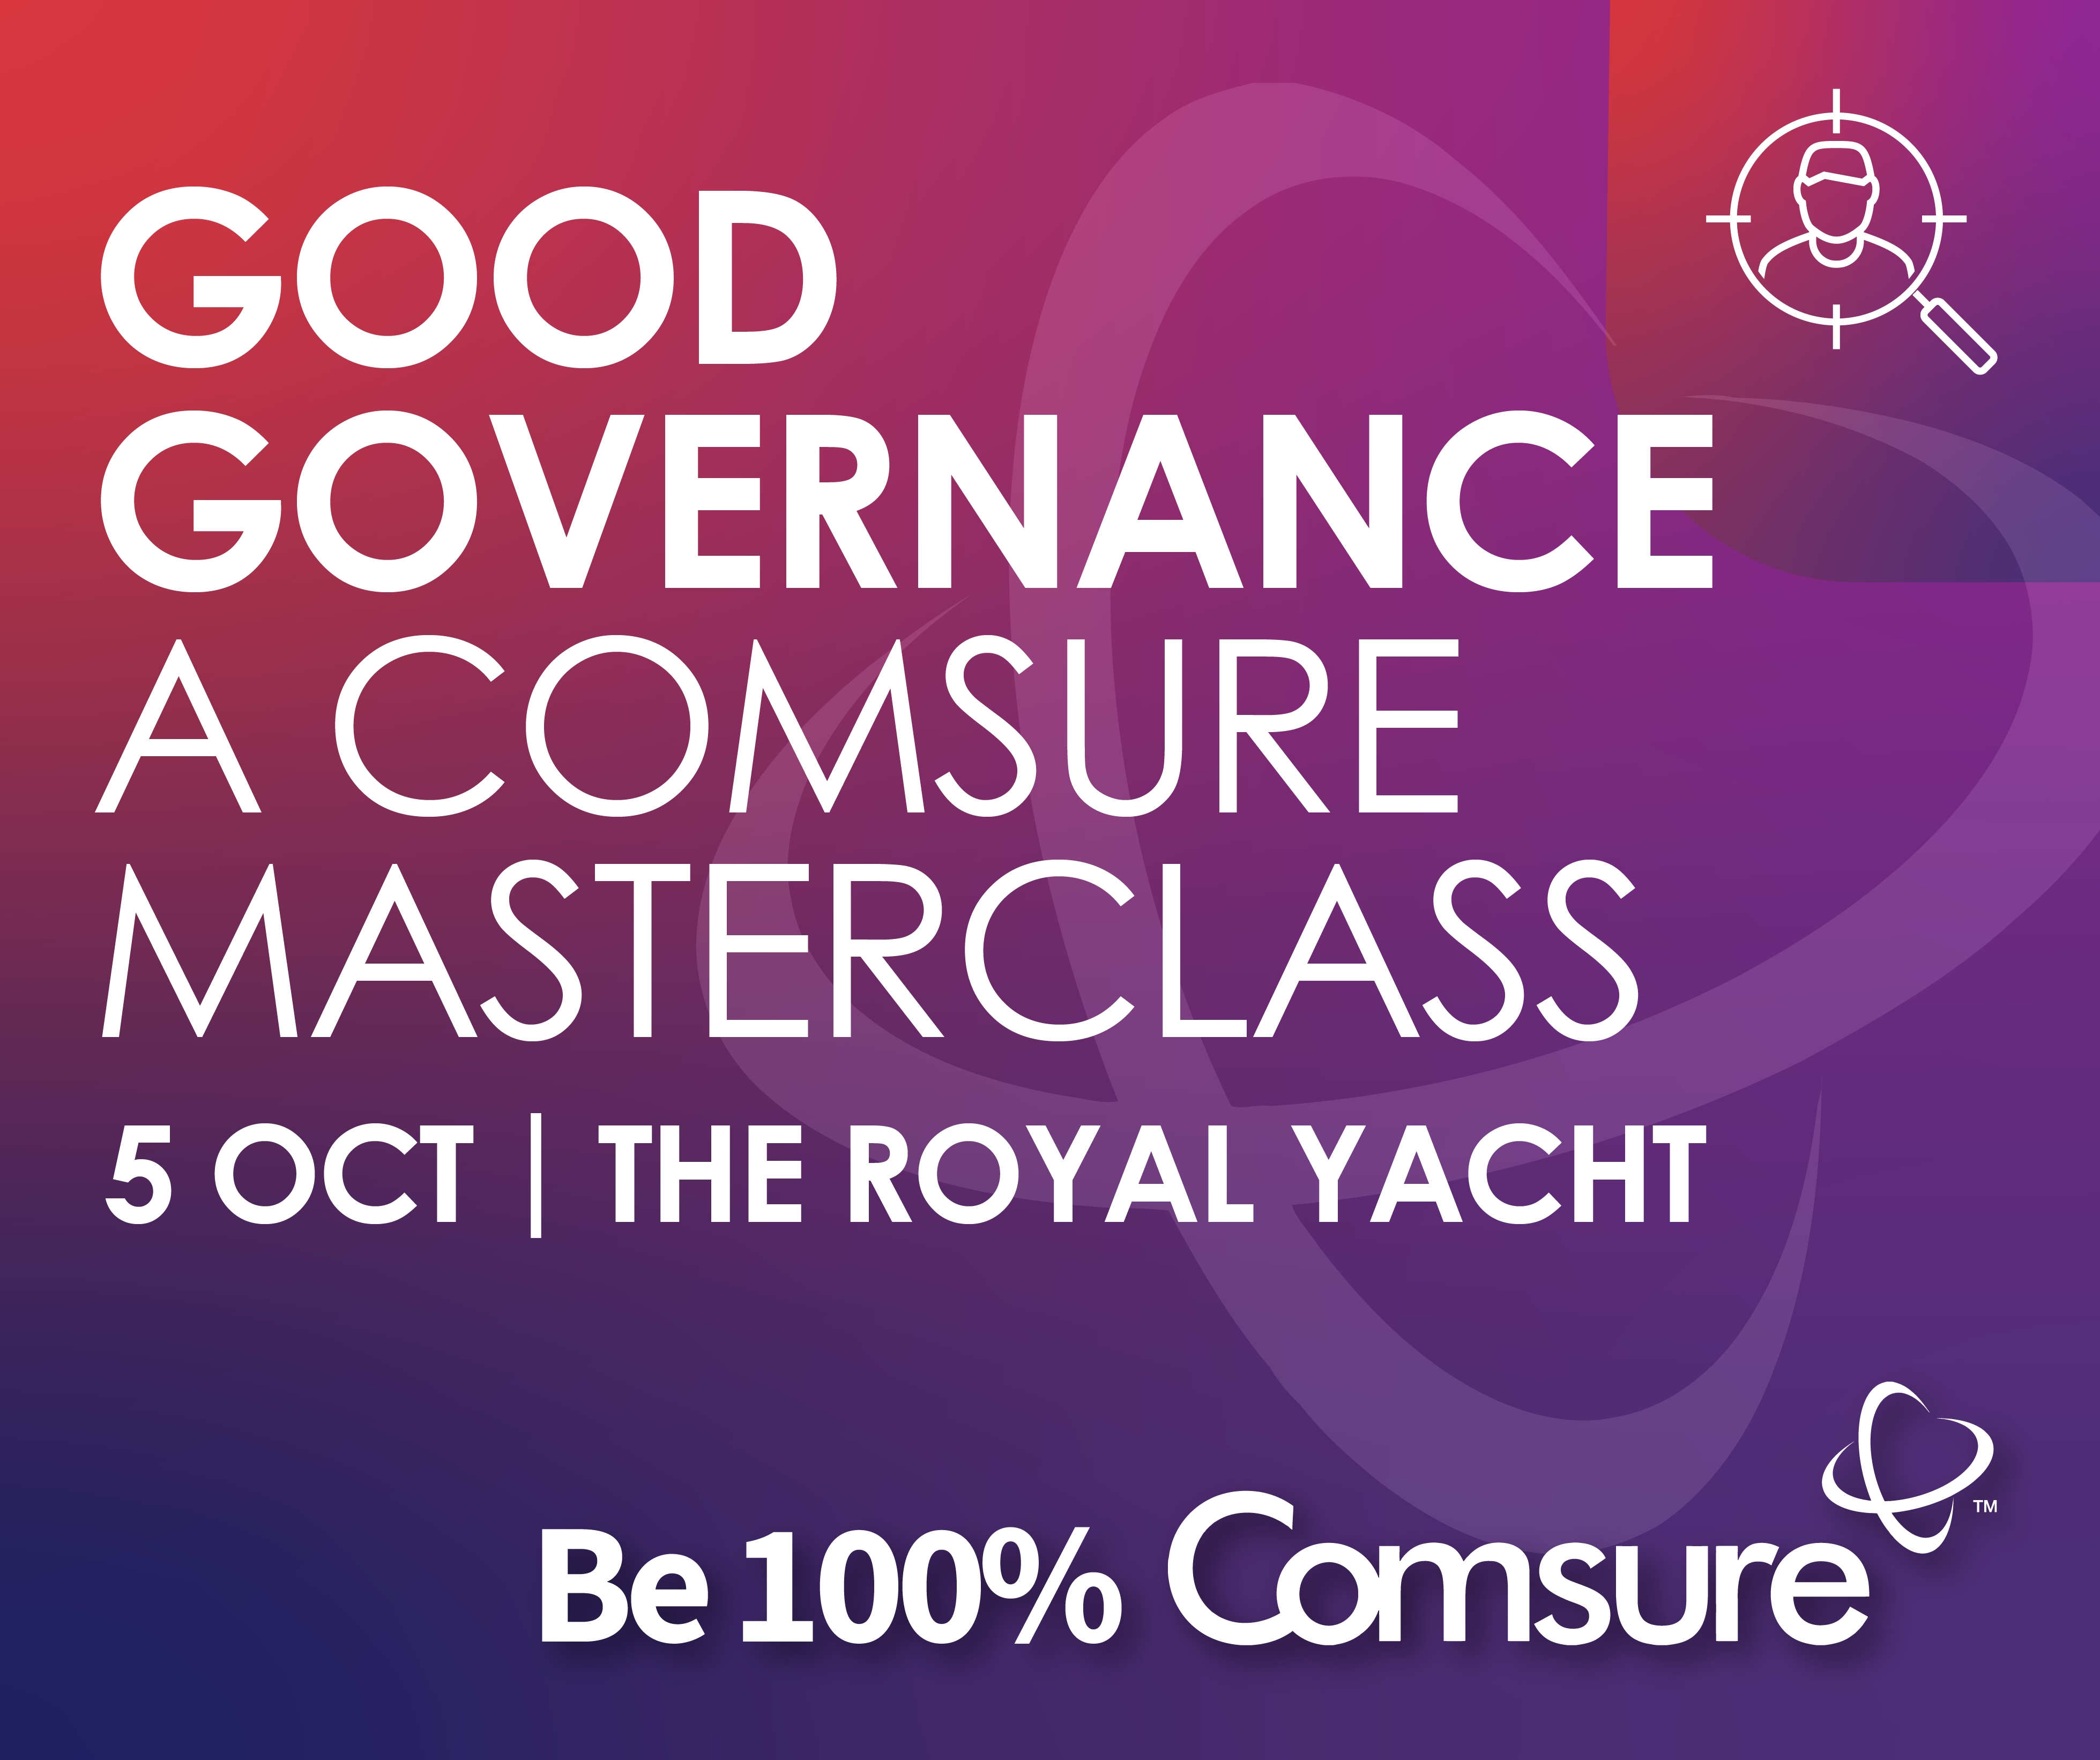 Good Governance a Comsure Masterclass Featured image